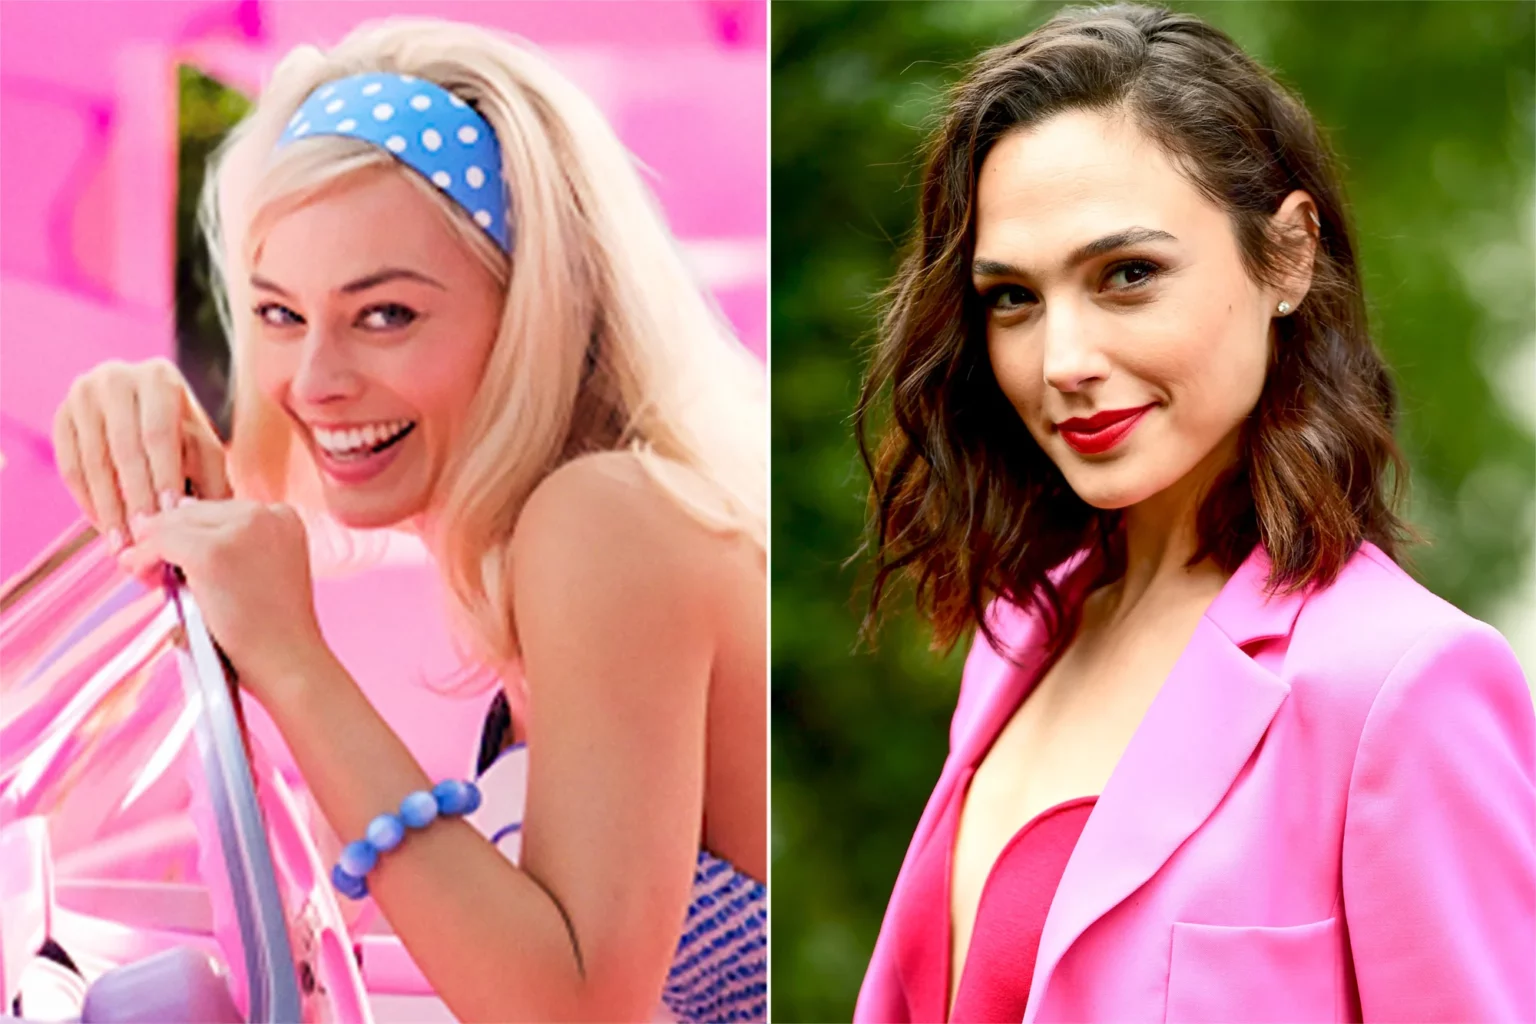 gal-gadot-extends-availability-for-next-barbie-movie-responding-to-margot-robbies-vision